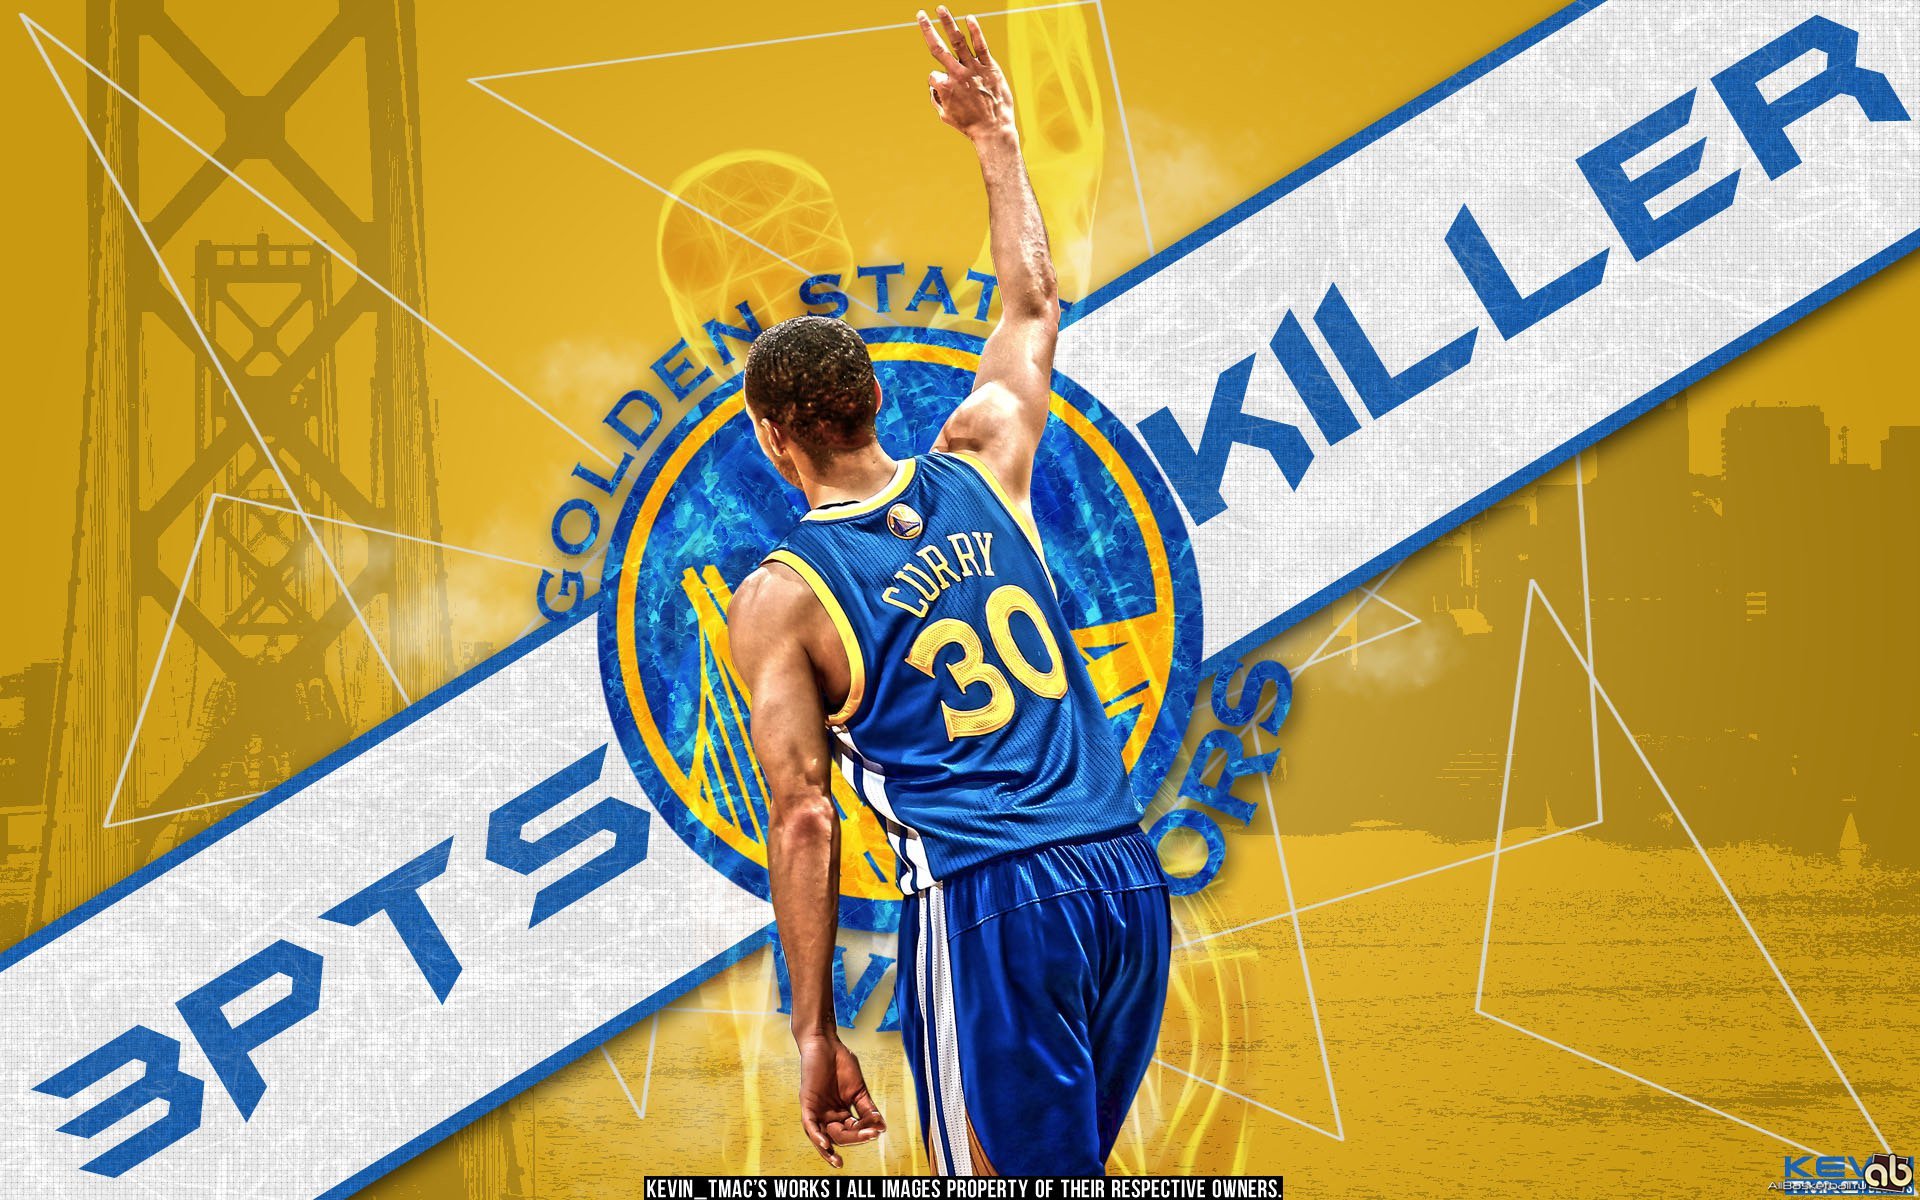 Stephen Curry Nba Player Wallpapers